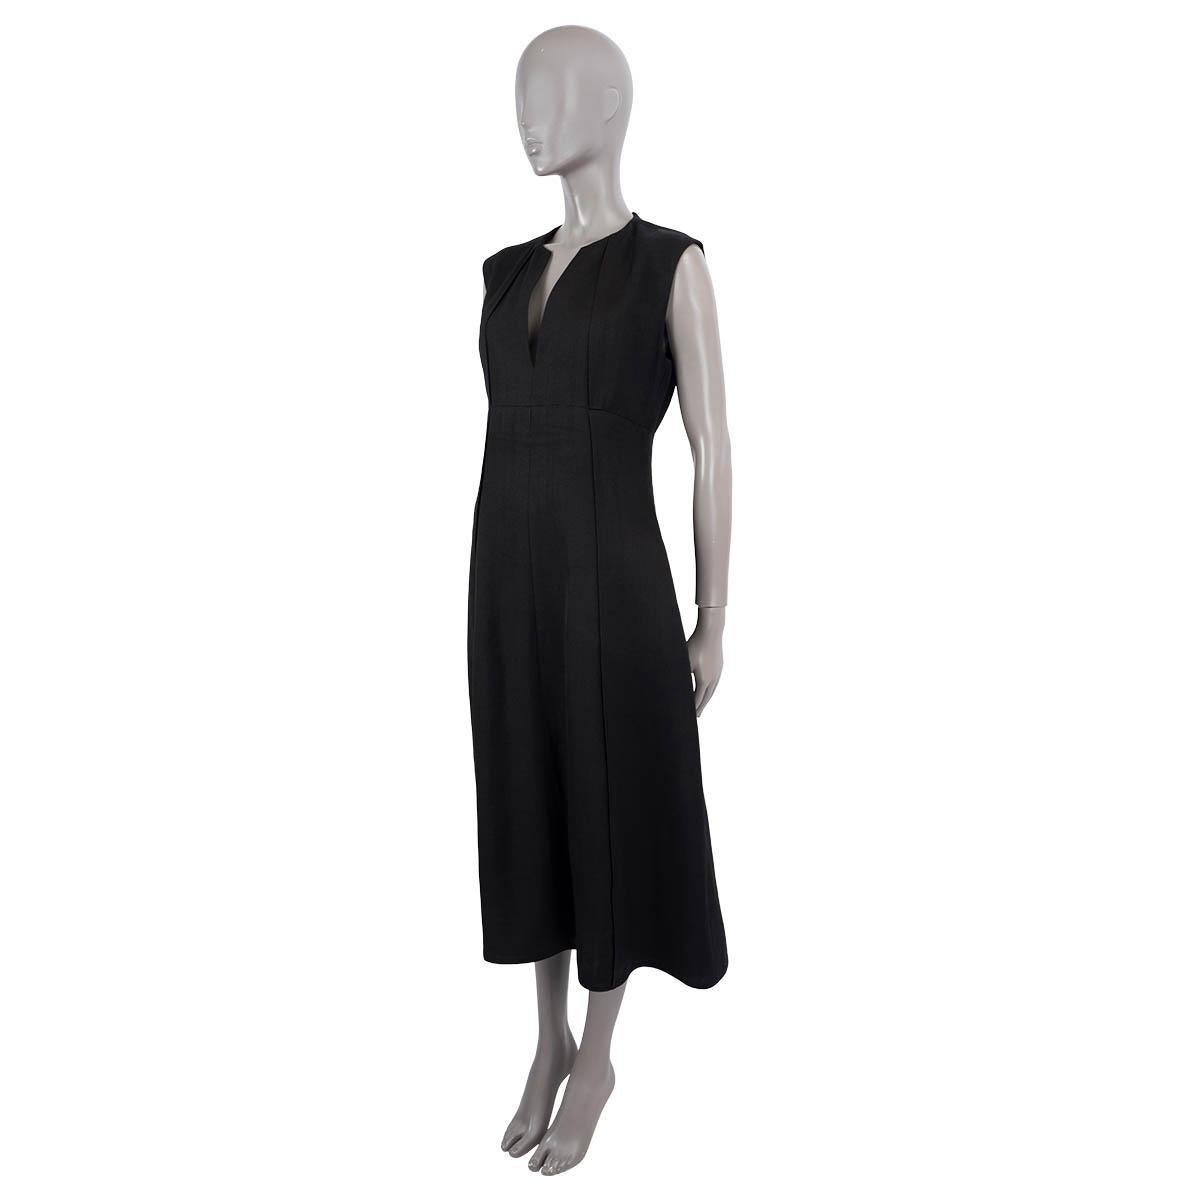 100% authentic Jil Sander plunging v-neck flared dress in black viscose (57%), silk (27%) and linen (16)%. The desgin features a concealed zipper on the back and slit pockets on the side. Lined in viscose (95%) and elastane (5%). Has been worn and